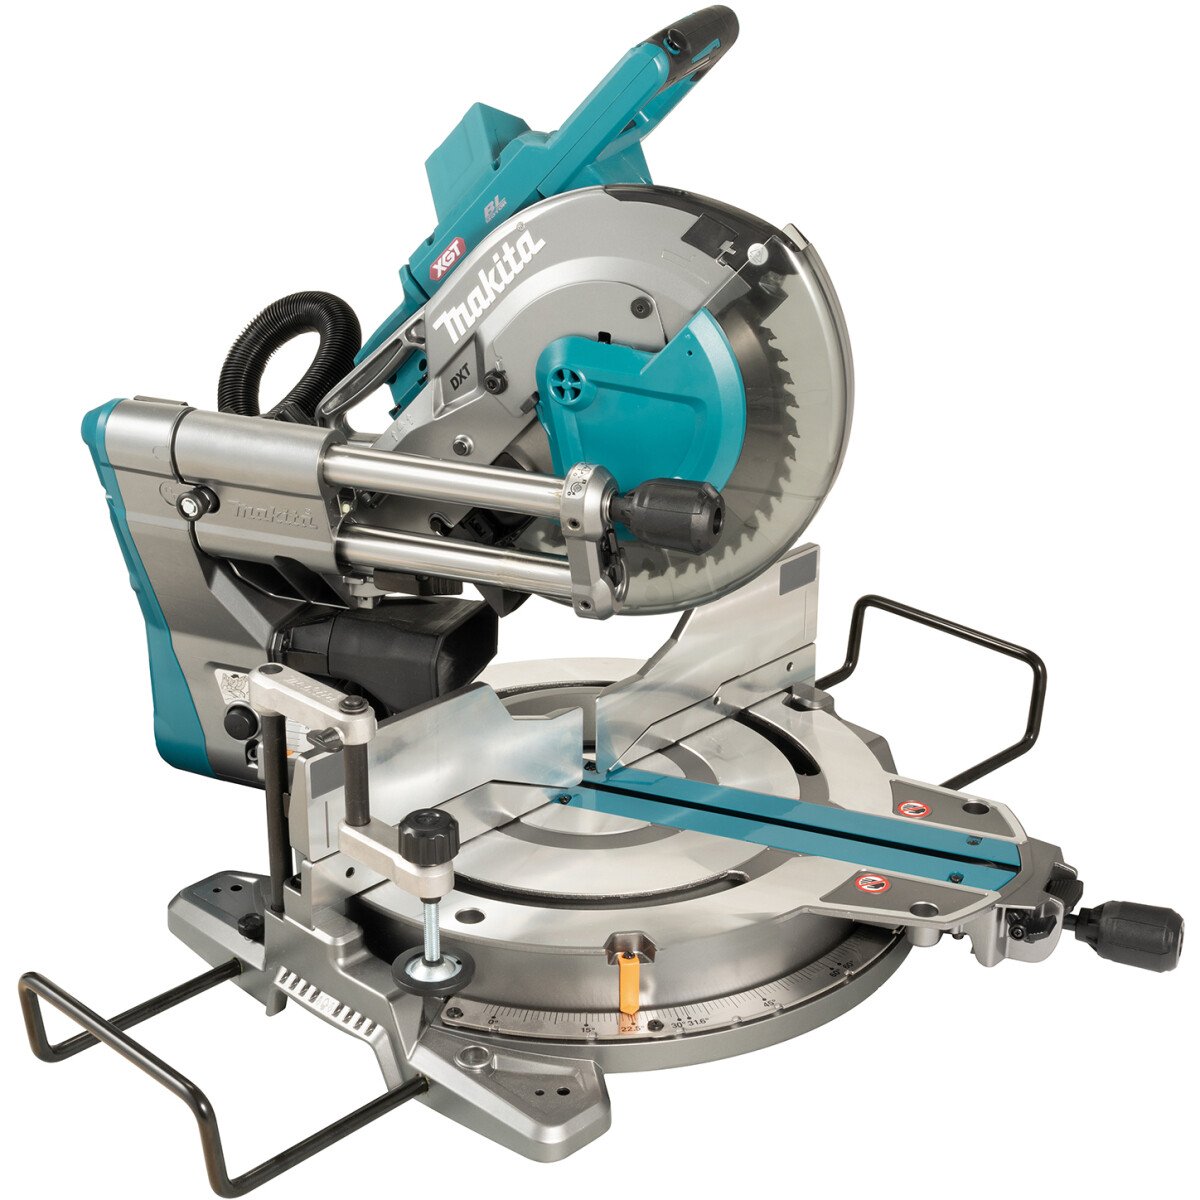 Makita LS004GZ01 Body Only 40V XGT 260mm Compound Mitre Saw